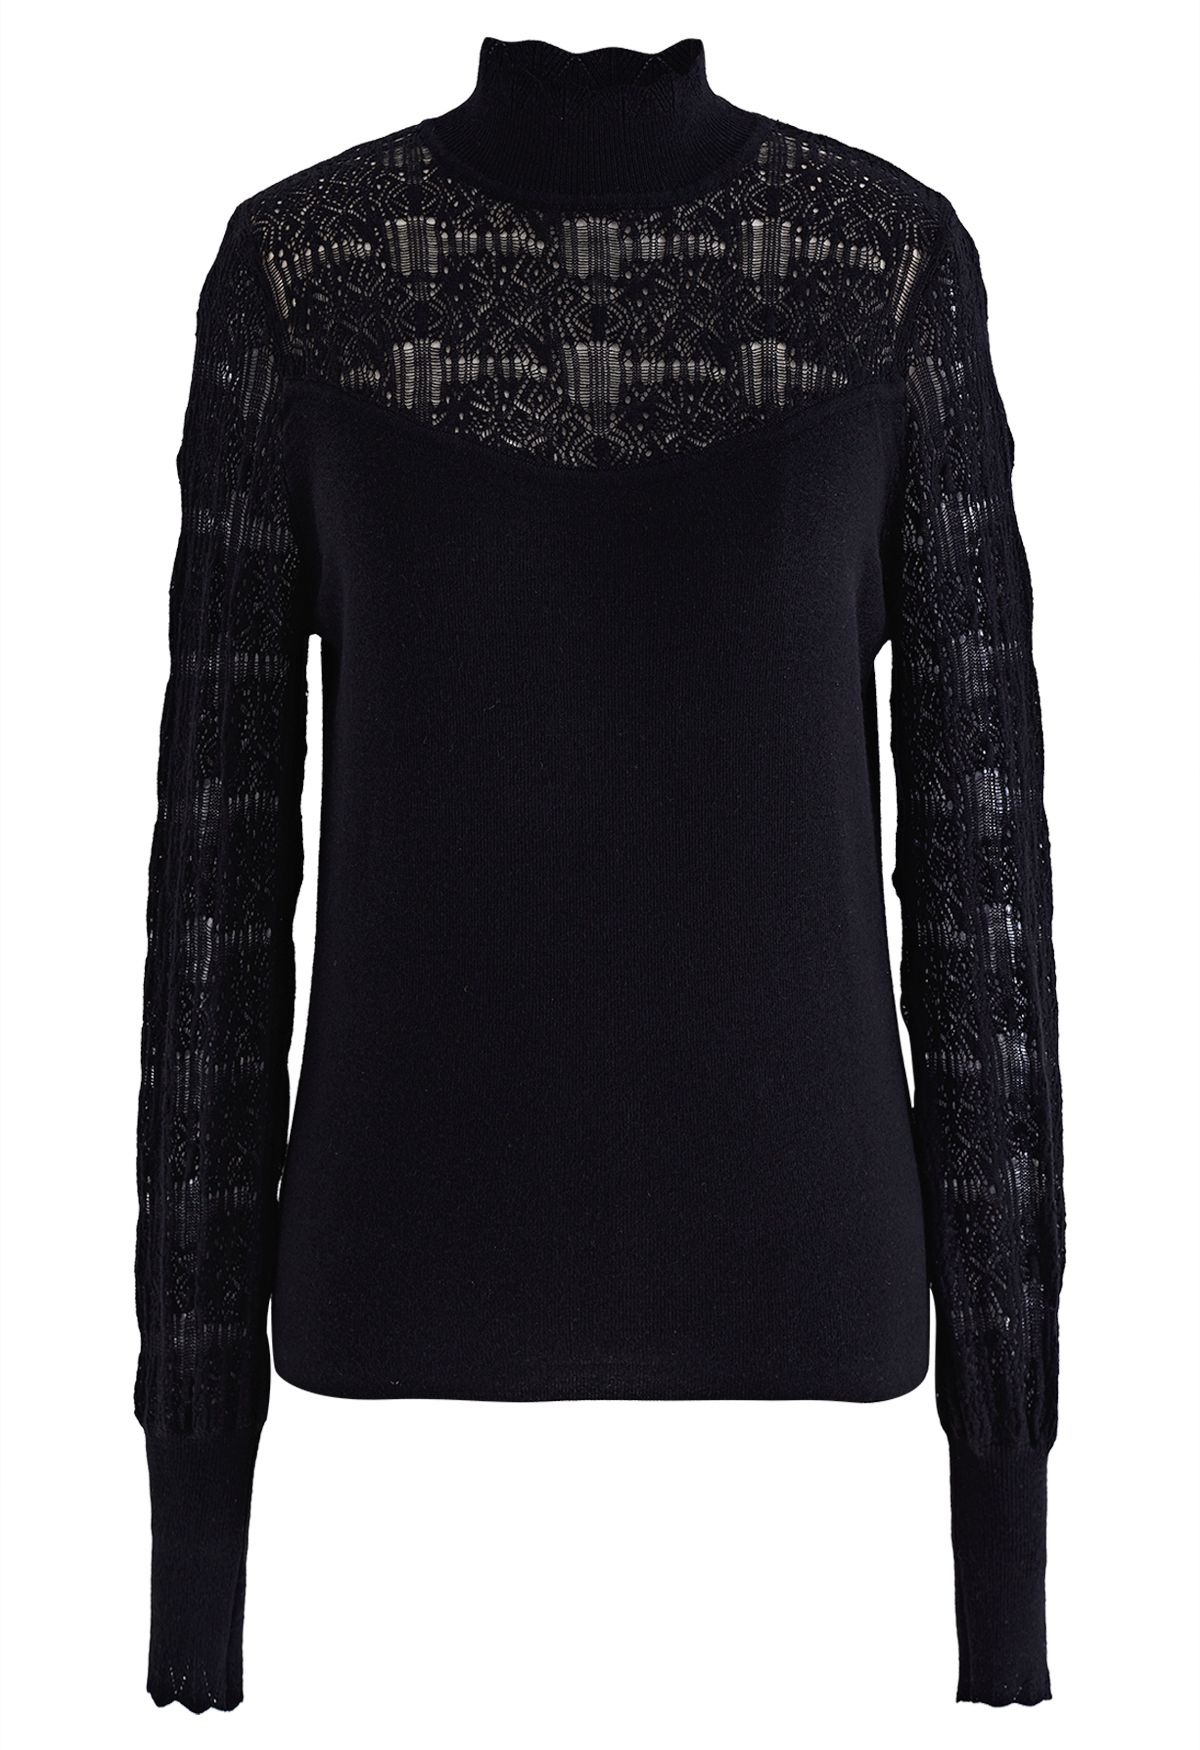 Mock Neck Pointelle Knit Top in Black - Retro, Indie and Unique Fashion